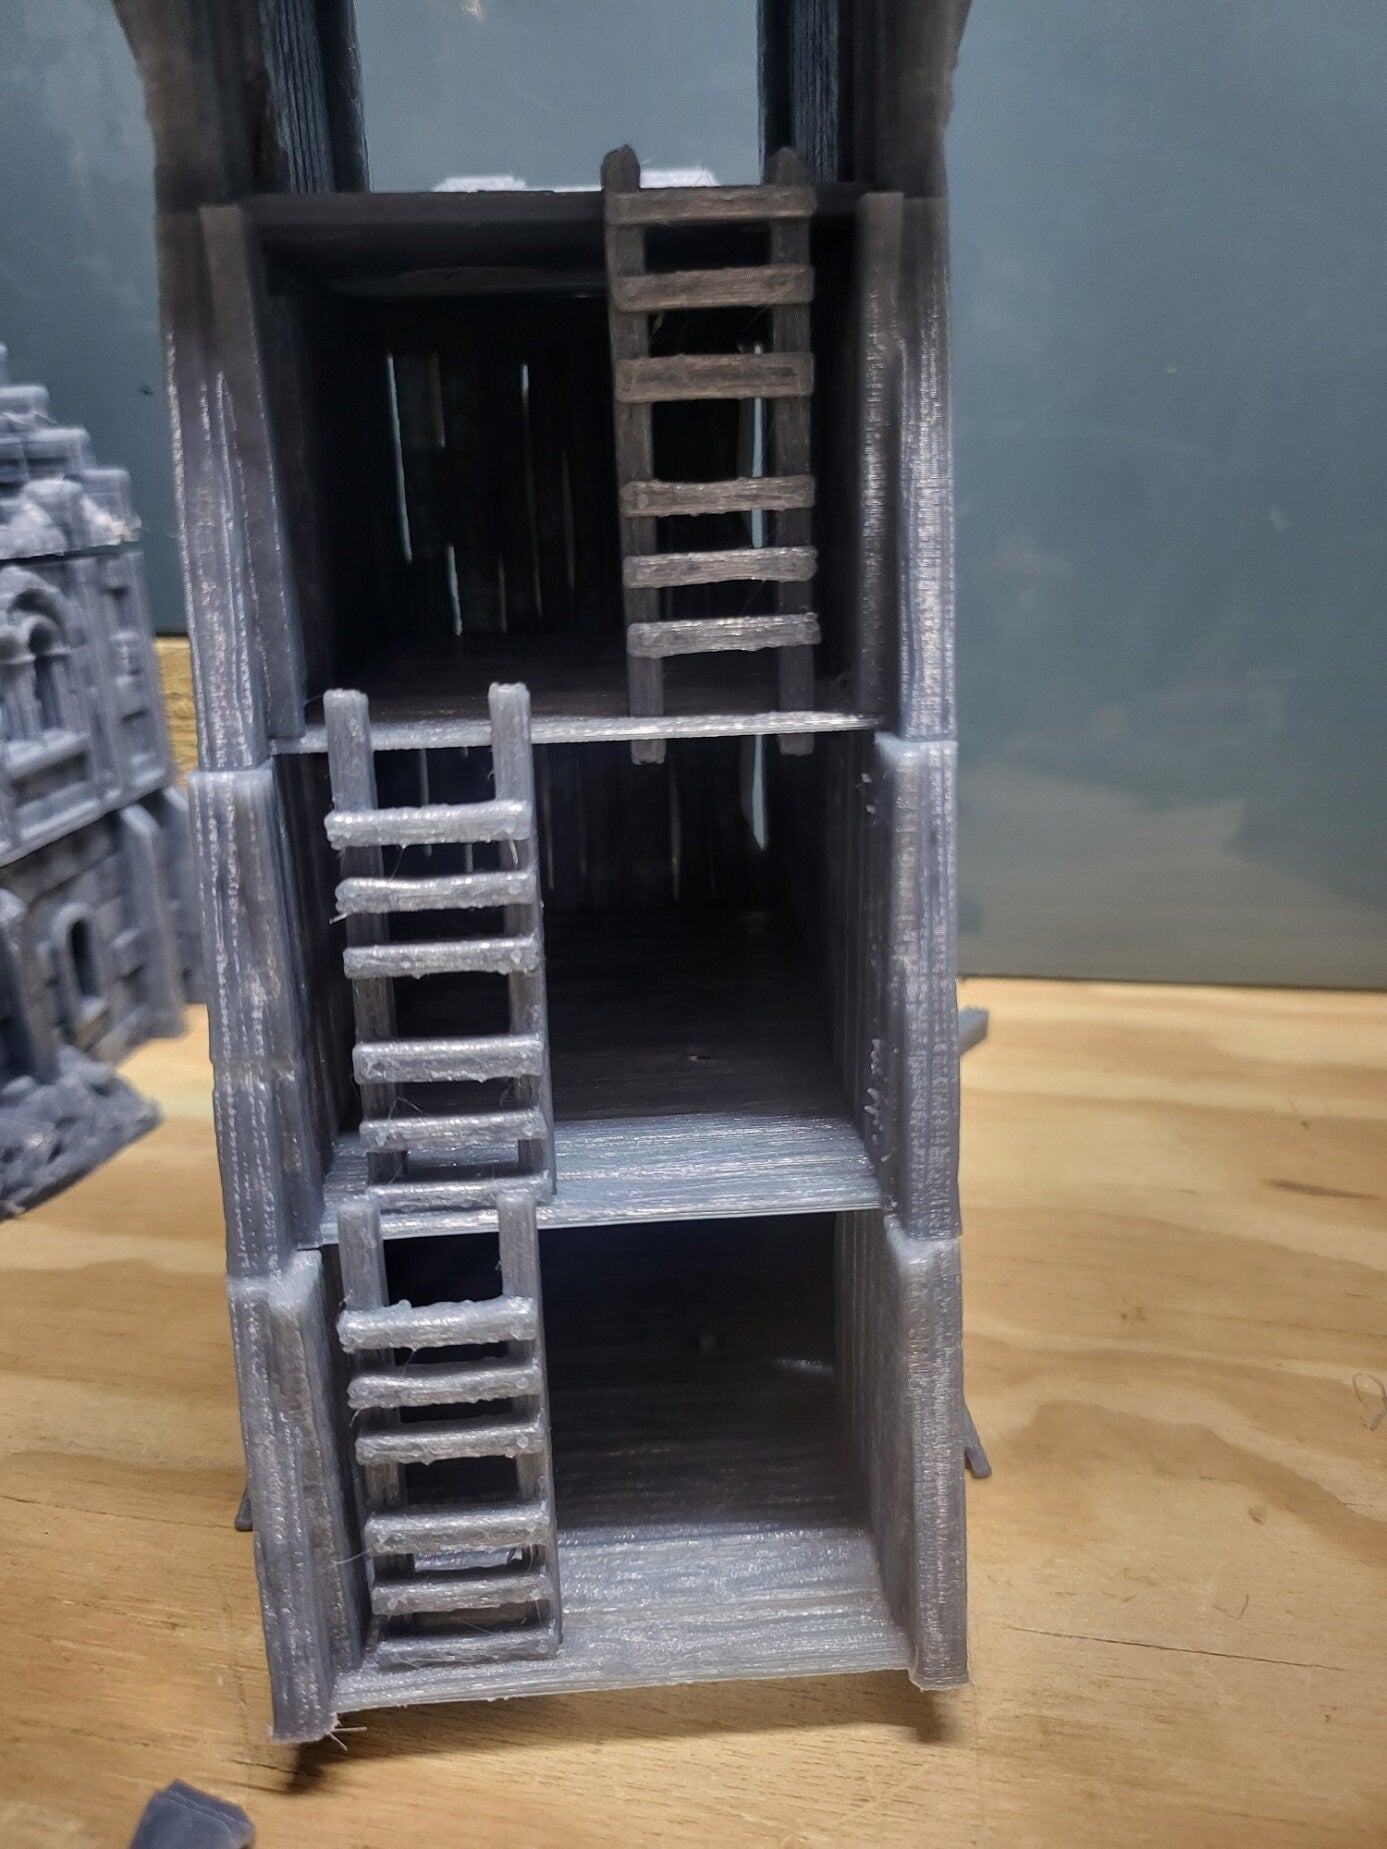 Siege Tower, Dungeons and Dragons, warhammer, wall breacher, wall tower, tower attack, Breach